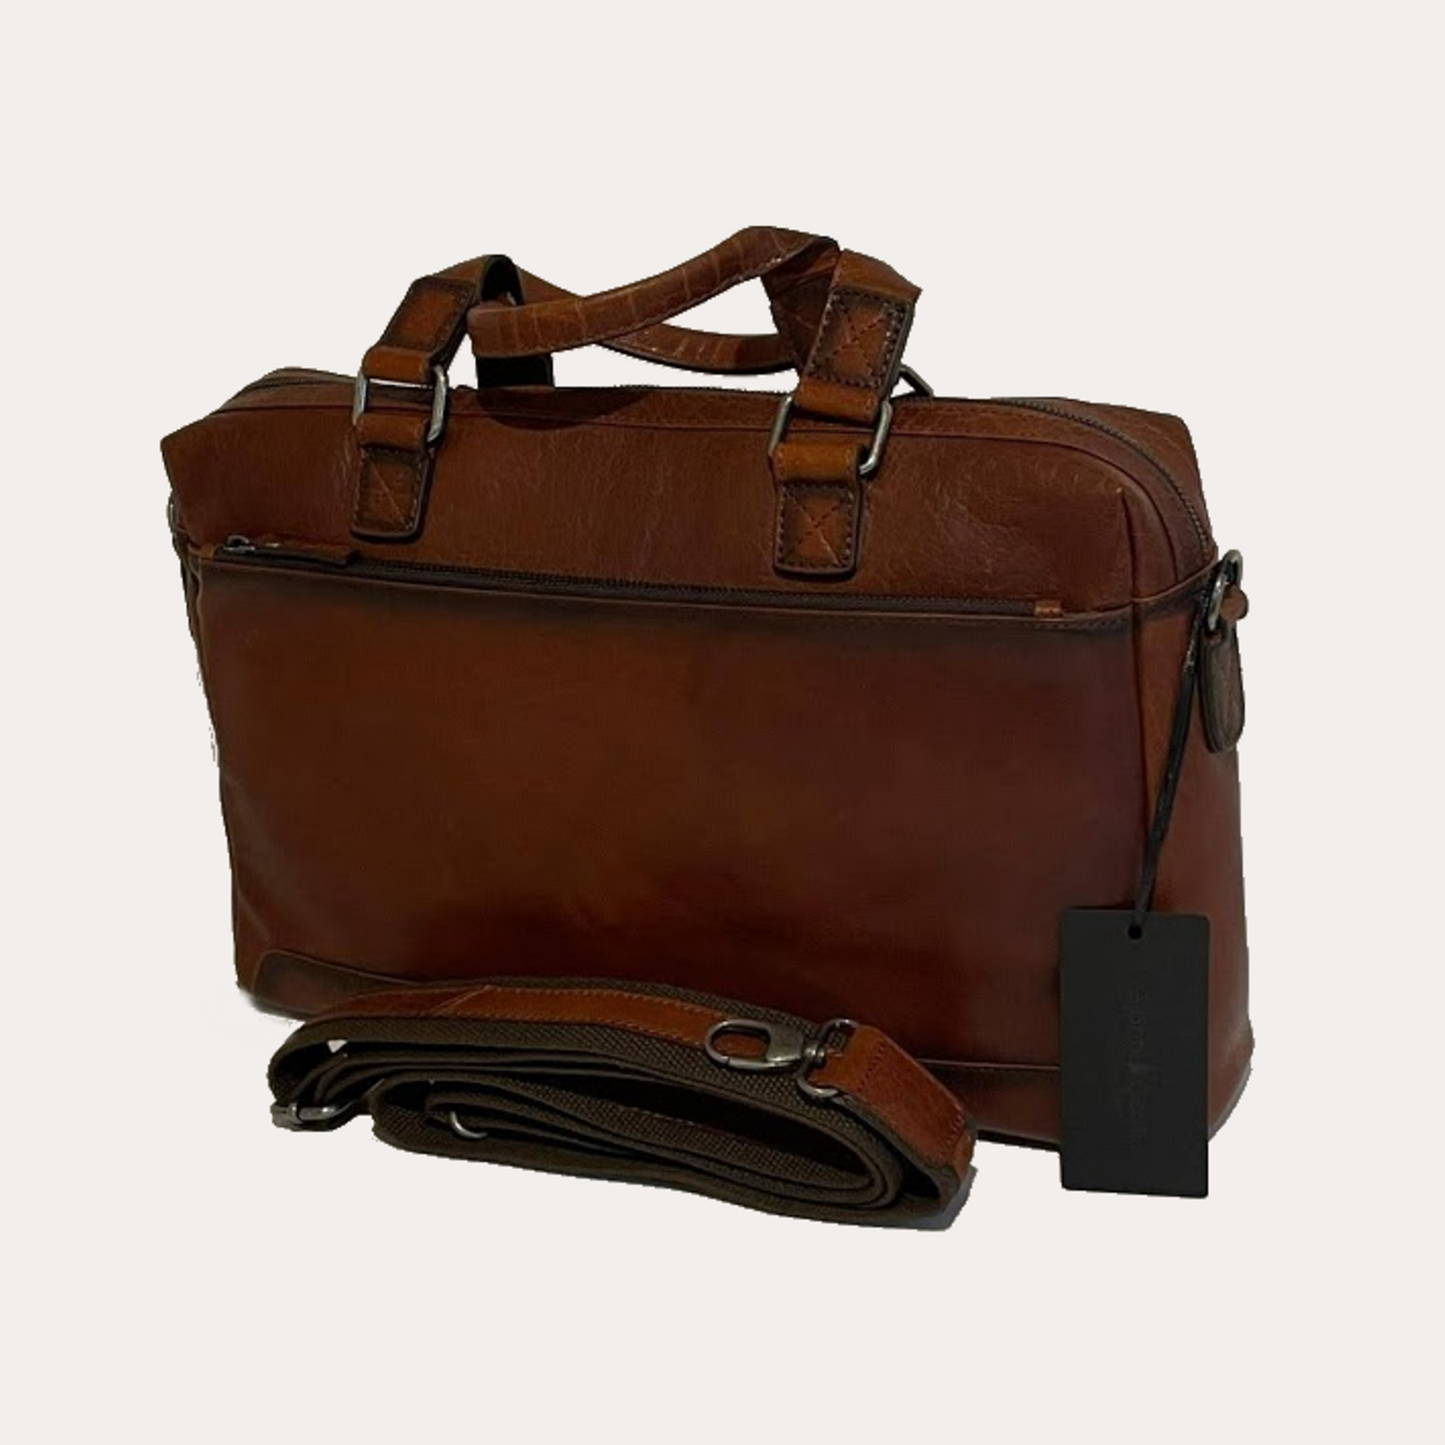 Gianni Conti Brown Leather Zip Top Briefcase